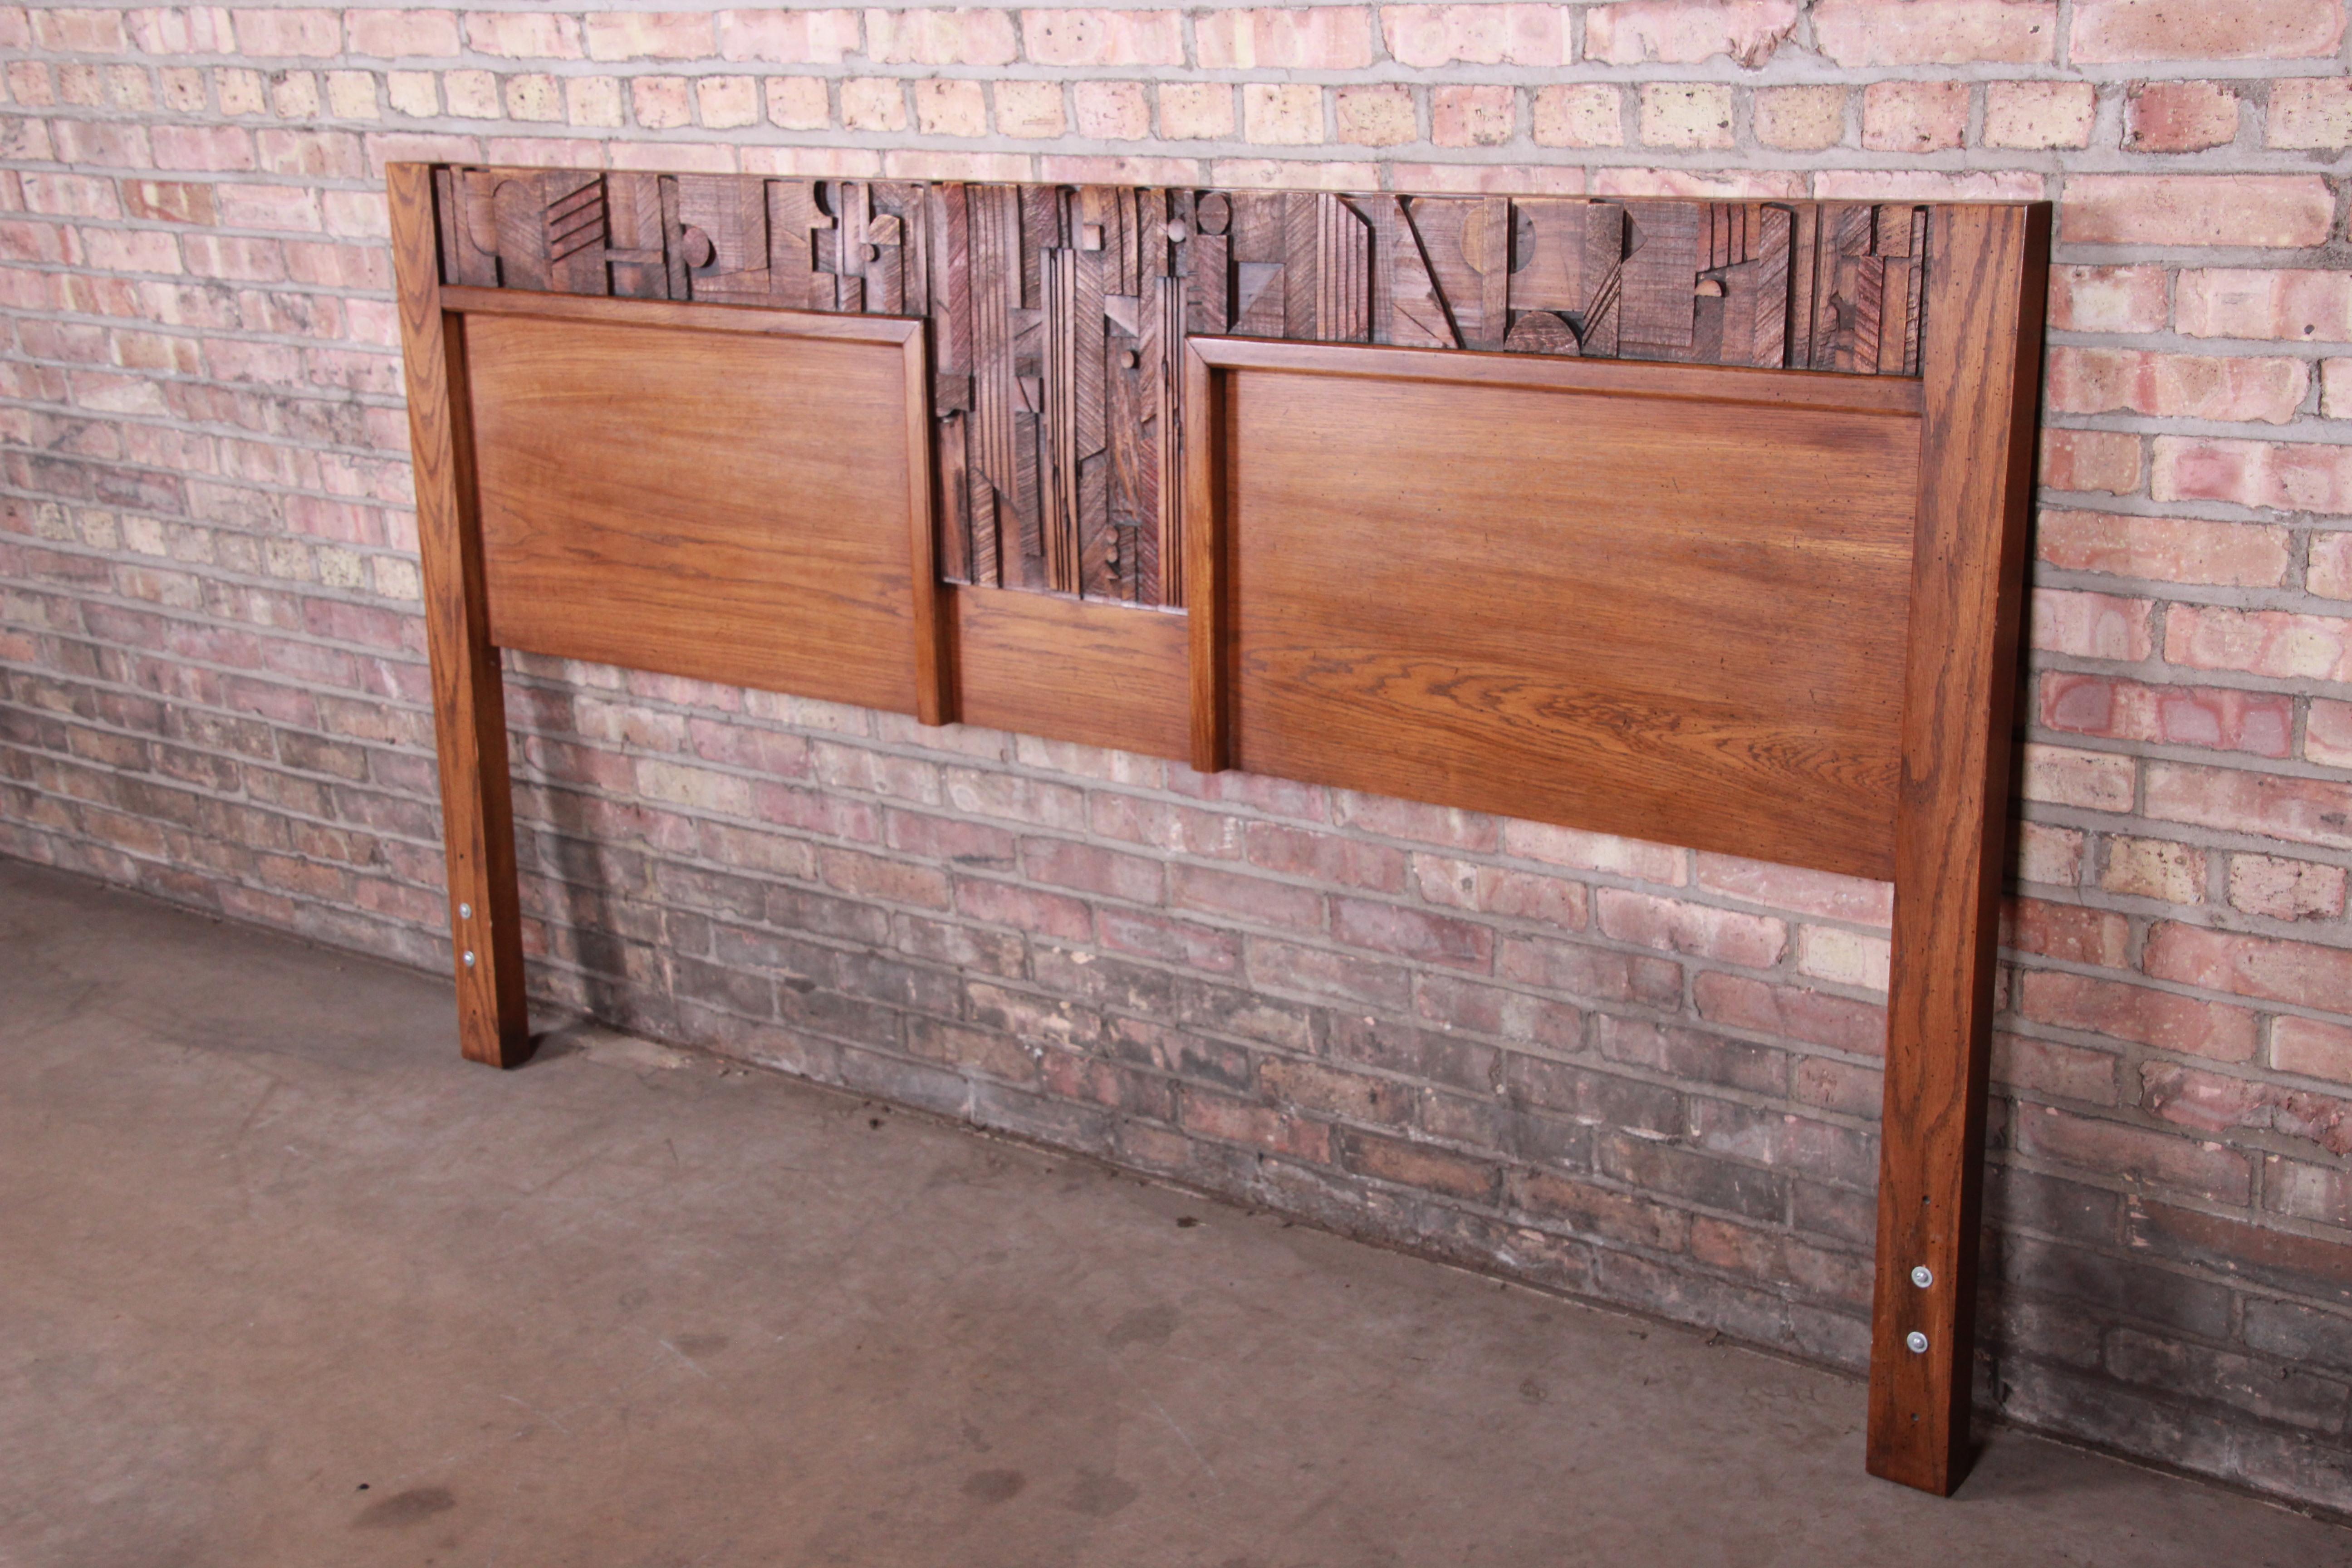 An exceptional Paul Evans style Mid-Century Modern Brutalist king size headboard

By Lane Furniture 